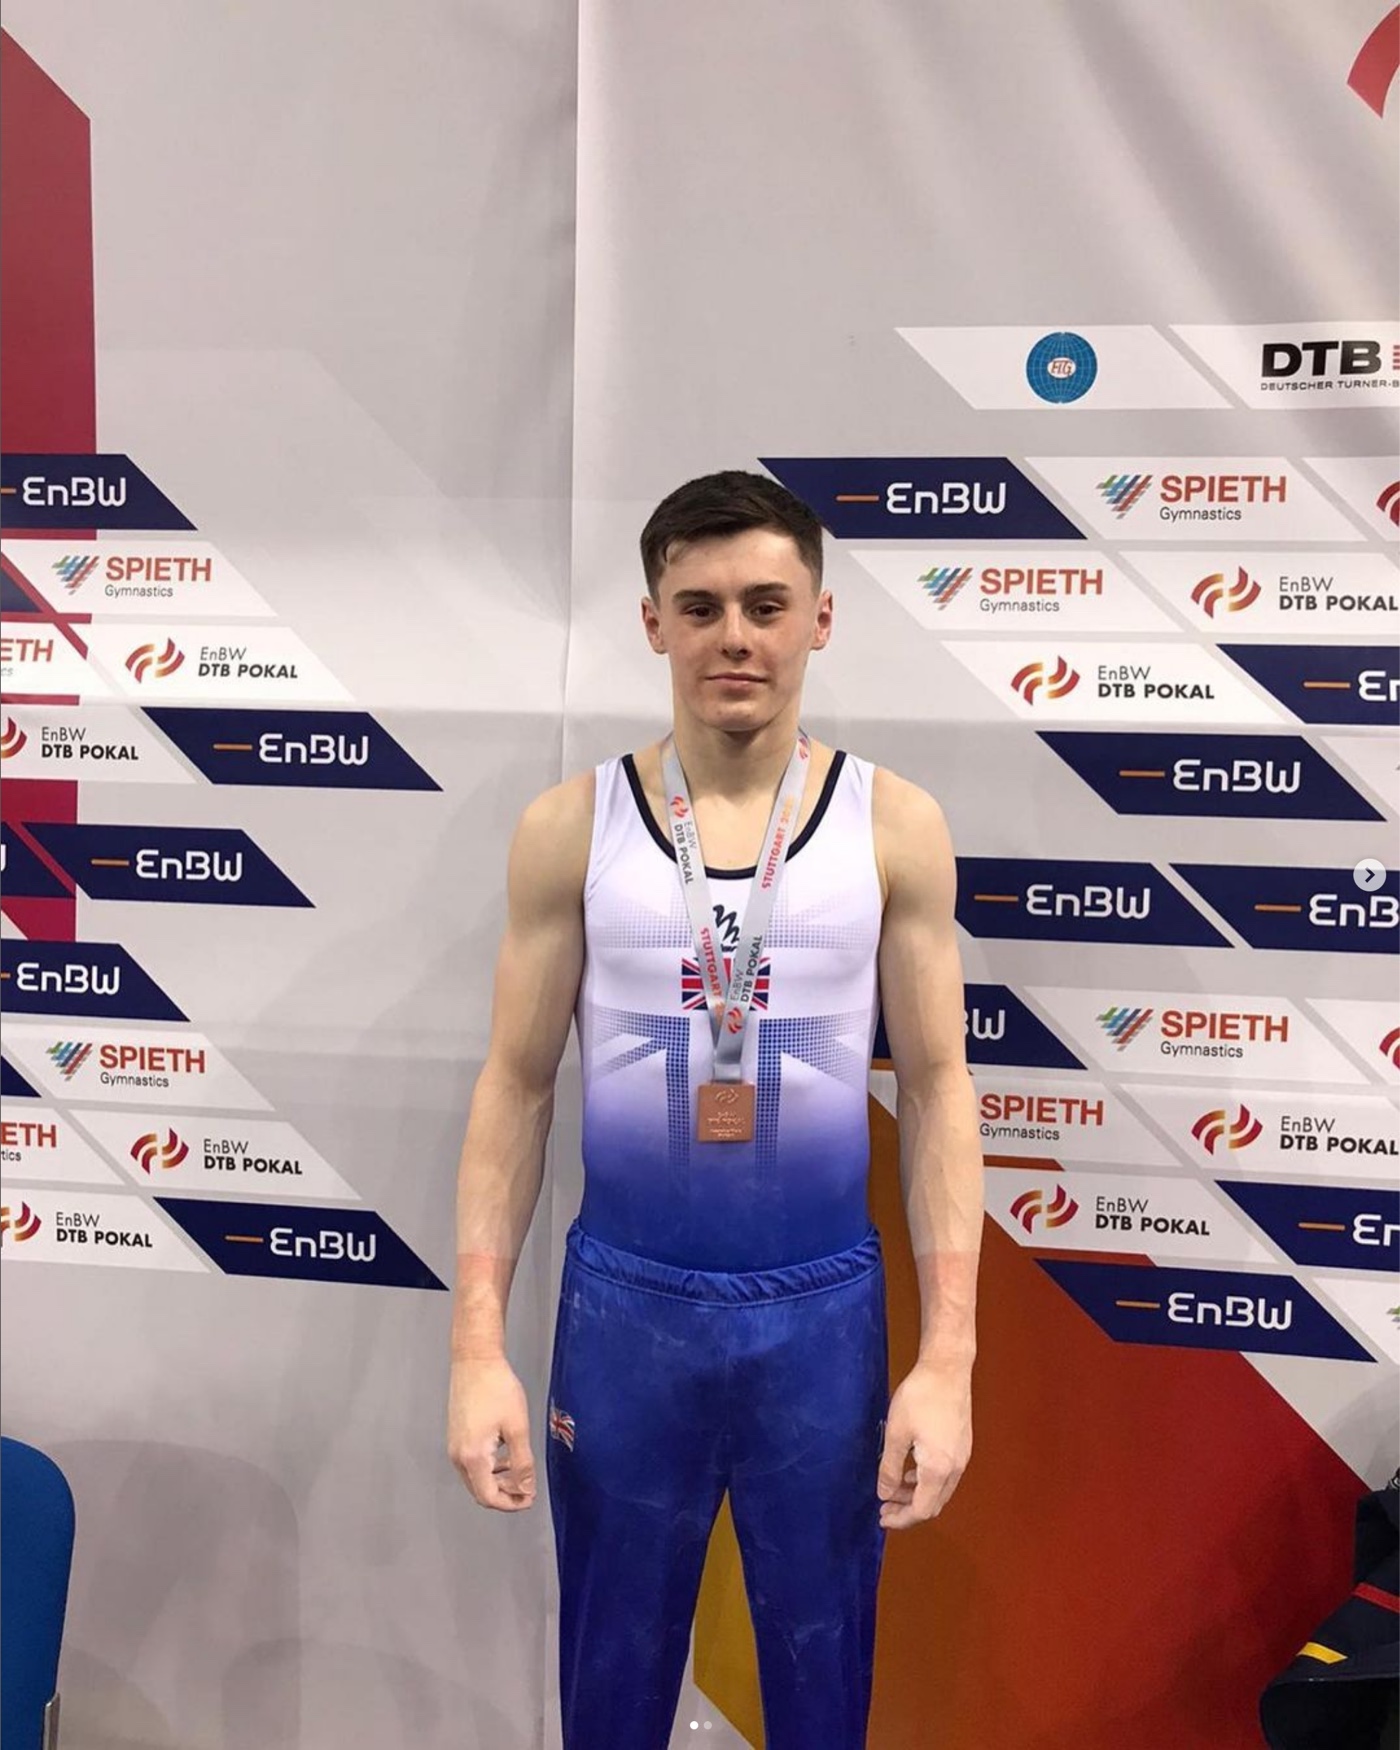 Jack Stanley - Bronze medal Rings at the DTB POKAL Cup in Stuttgard in March 2022